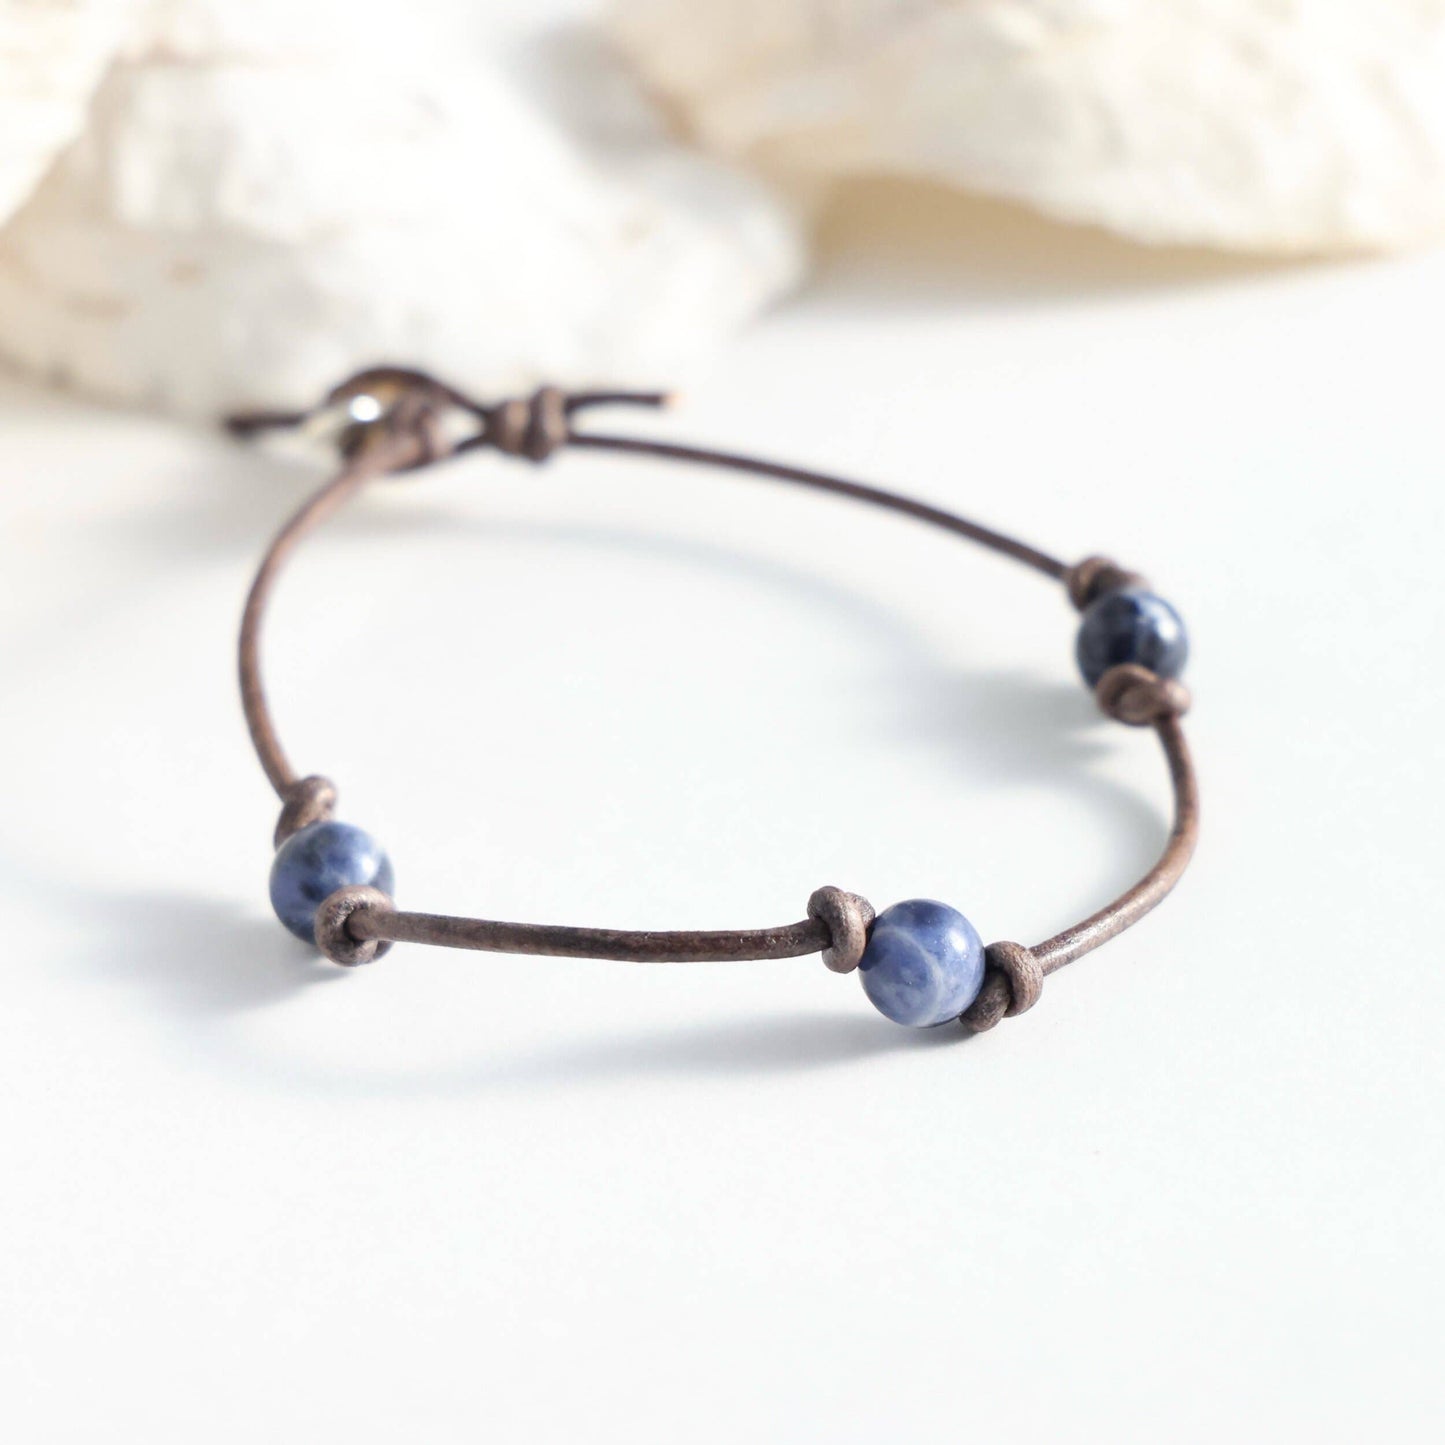 Boho Stone and Leather Anklet